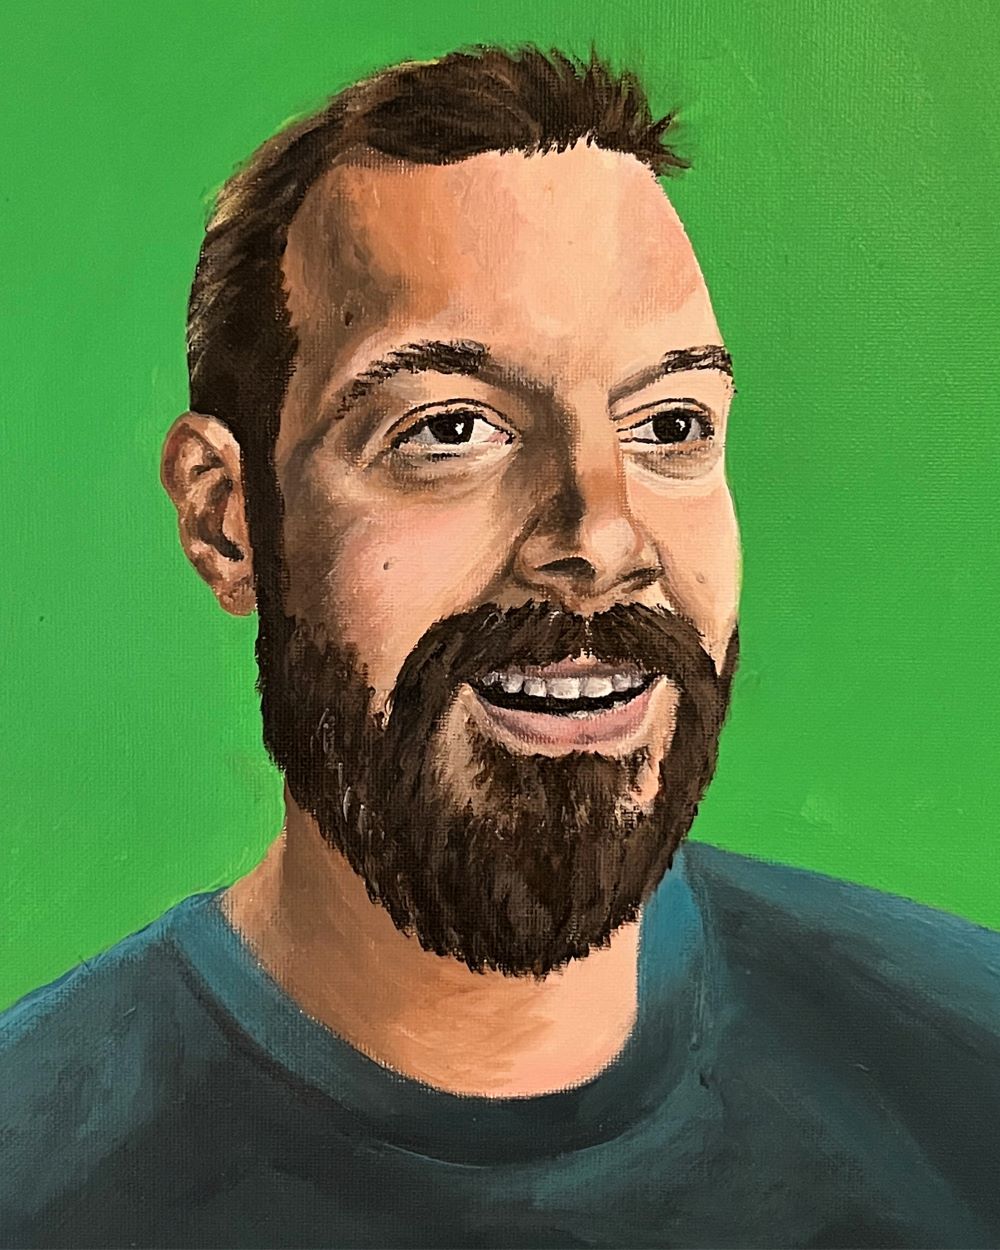 A painted portrait of a bearded man with green background